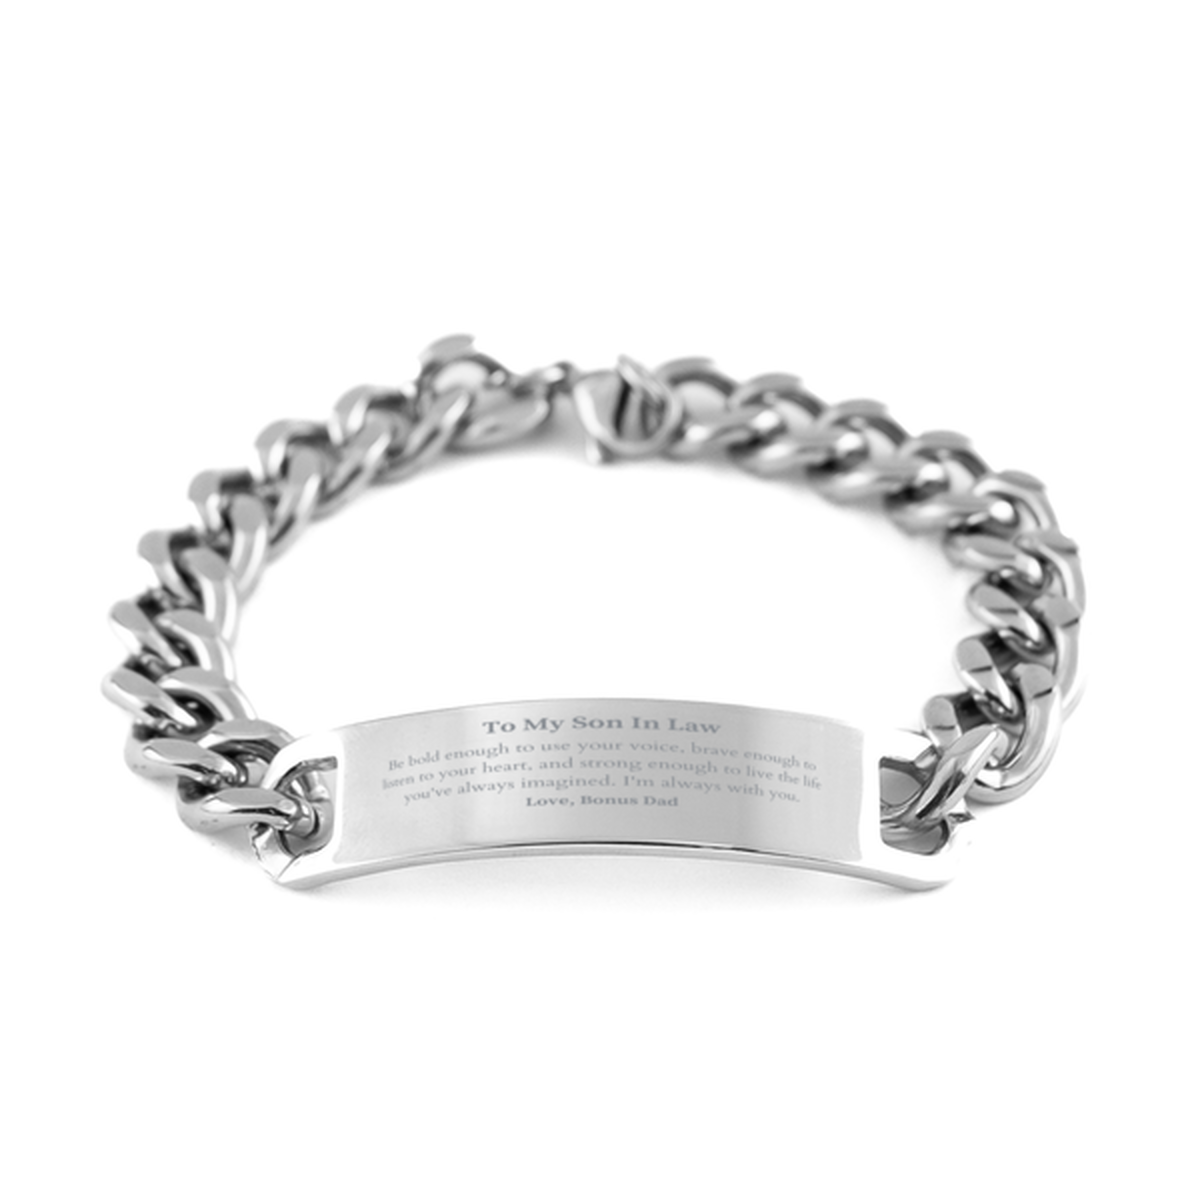 Keepsake Son In Law Cuban Chain Stainless Steel Bracelet Gift Idea Graduation Christmas Birthday Son In Law from Bonus Dad, Son In Law Be bold enough to use your voice, brave enough to listen to your heart. Love, Bonus Dad